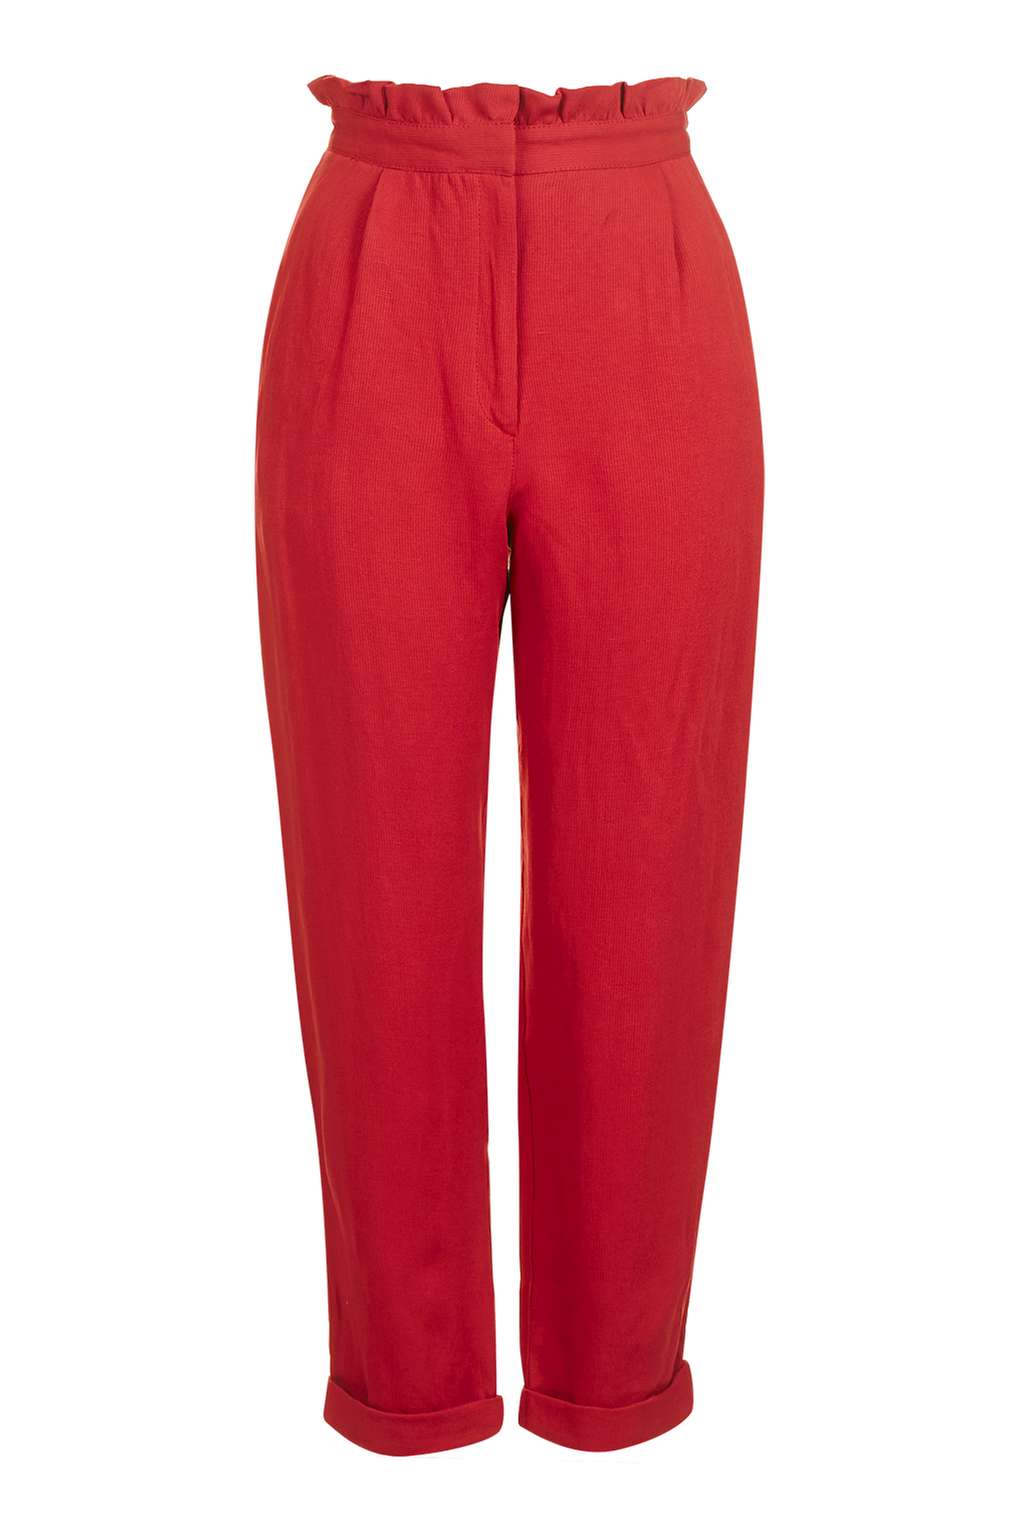 red_trousers